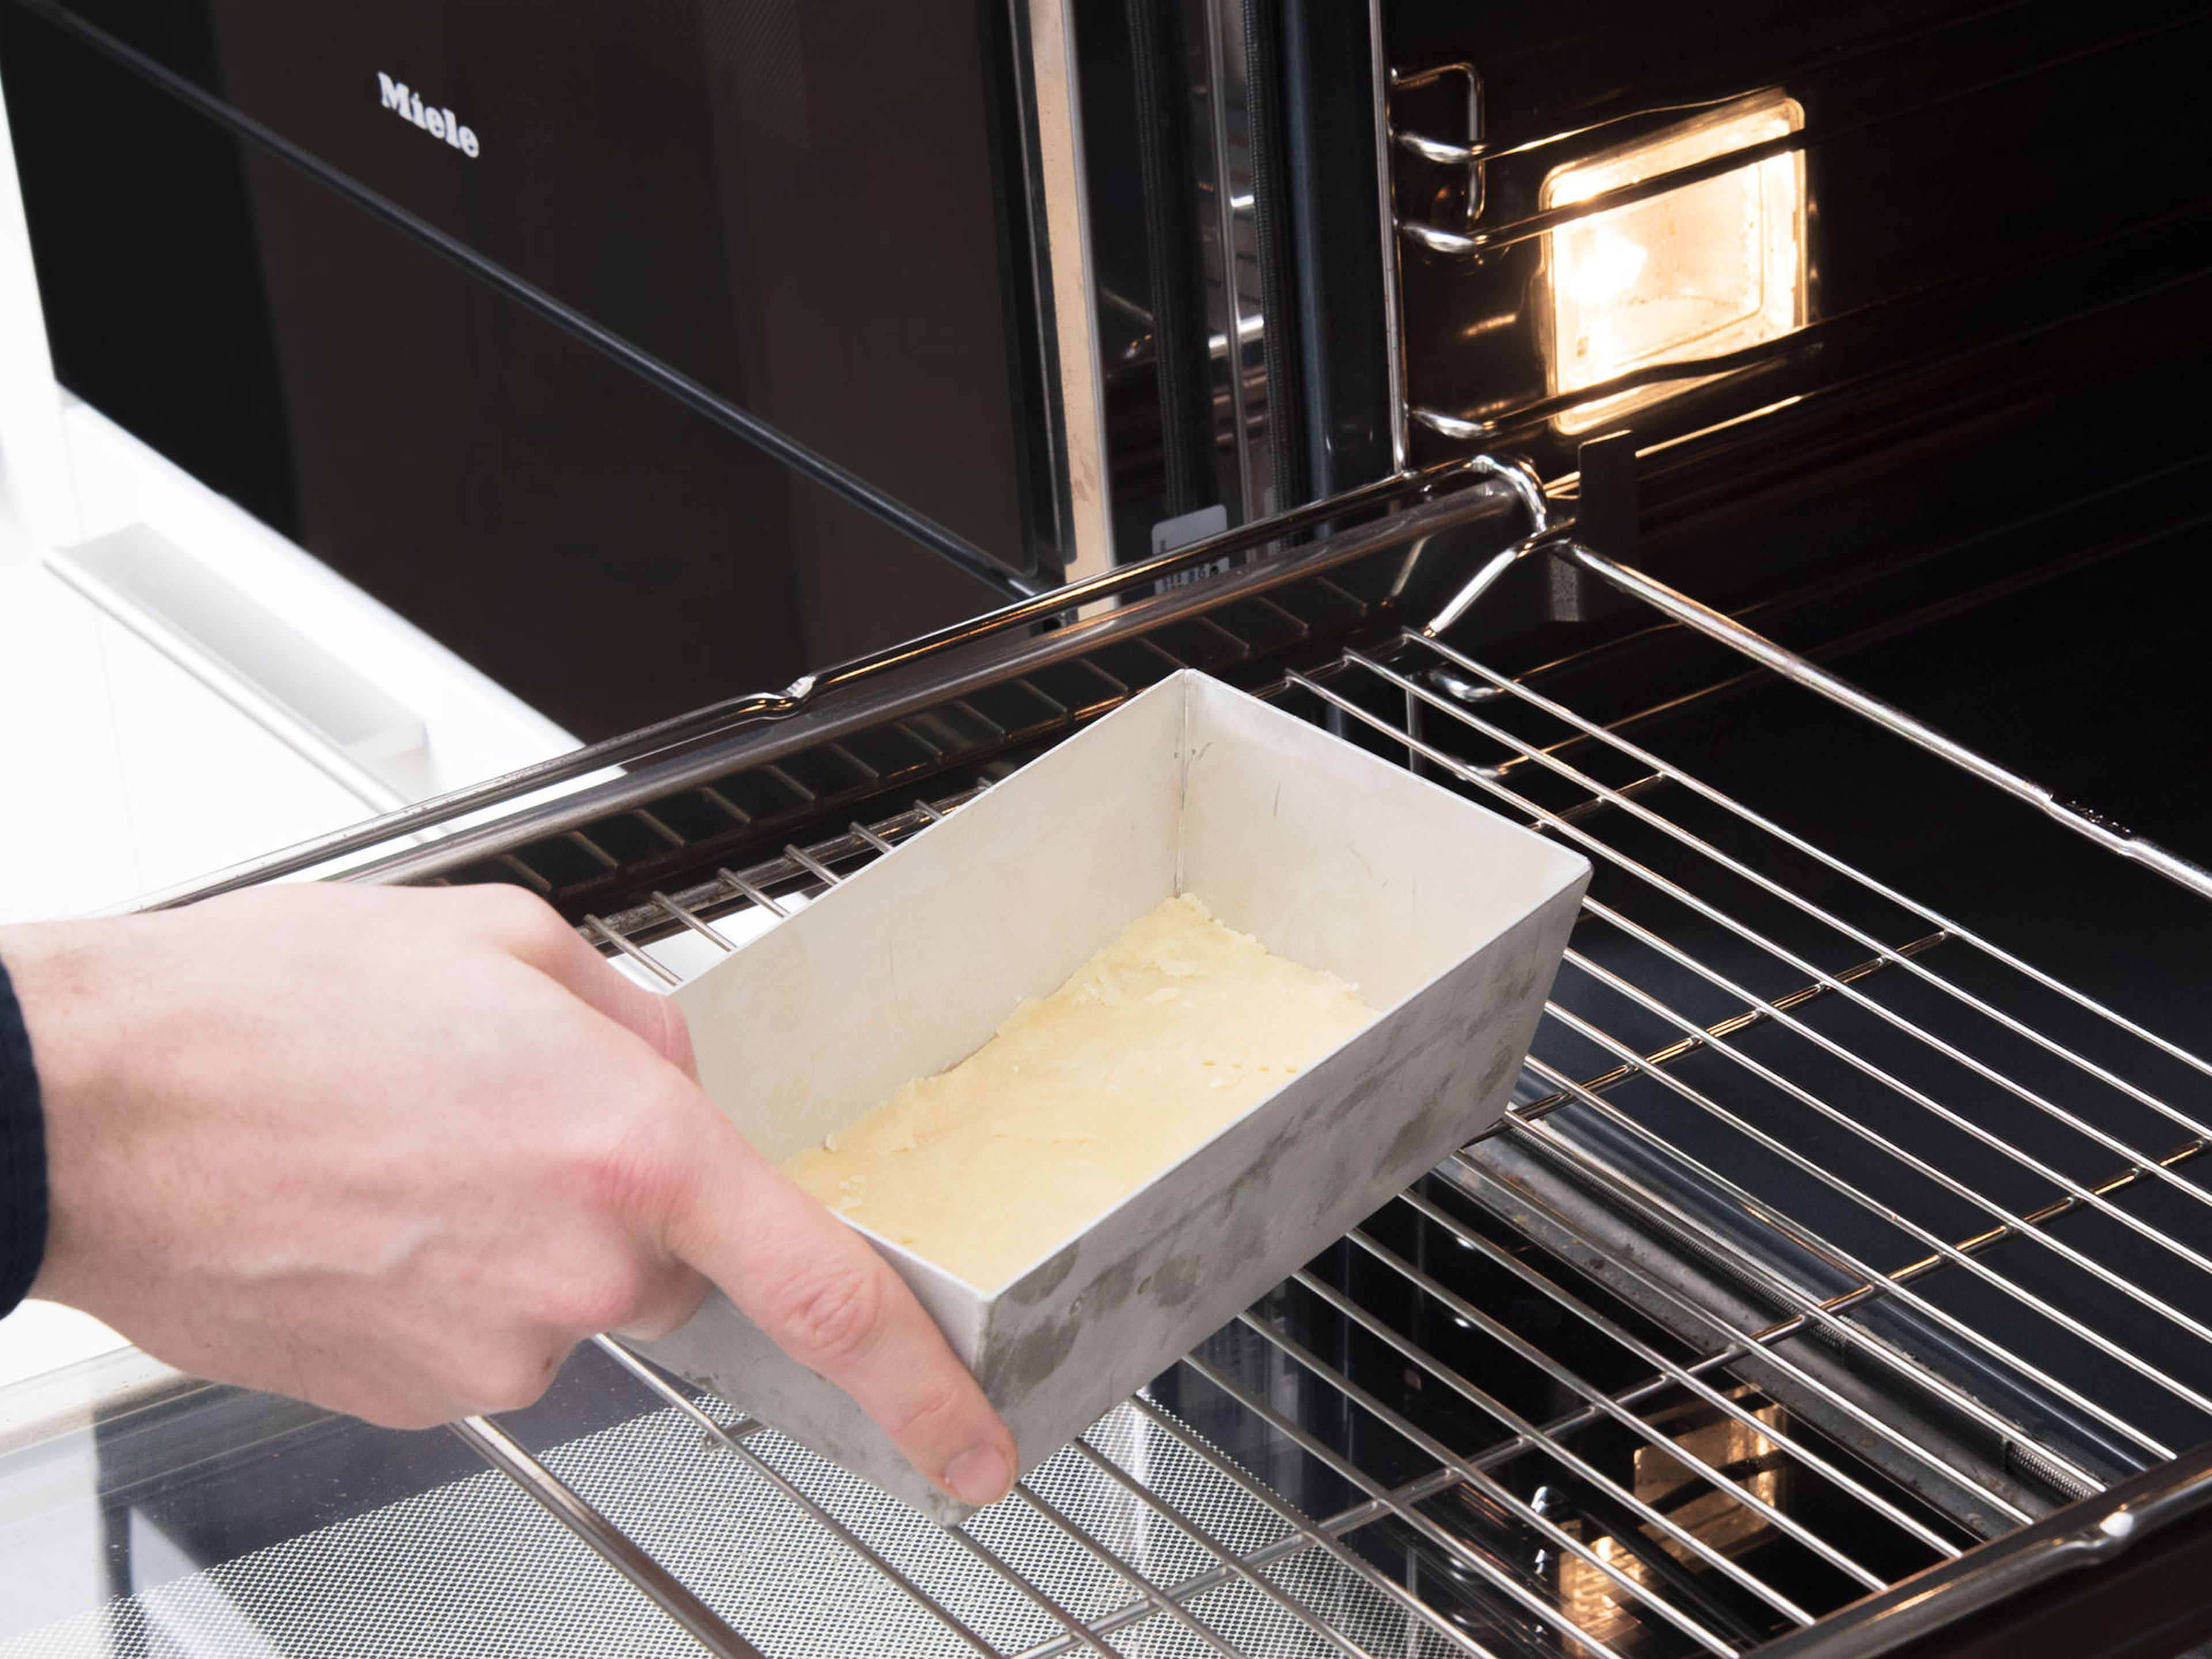 Pre-heat oven to 170°C/340°F. Remove dough from fridge and roll out to a thickness of approx. 5-mm/0.2-in. Transfer dough to the bottom of a parchment-lined loaf pan and trim off any excess. Bake for approx. 15 min.